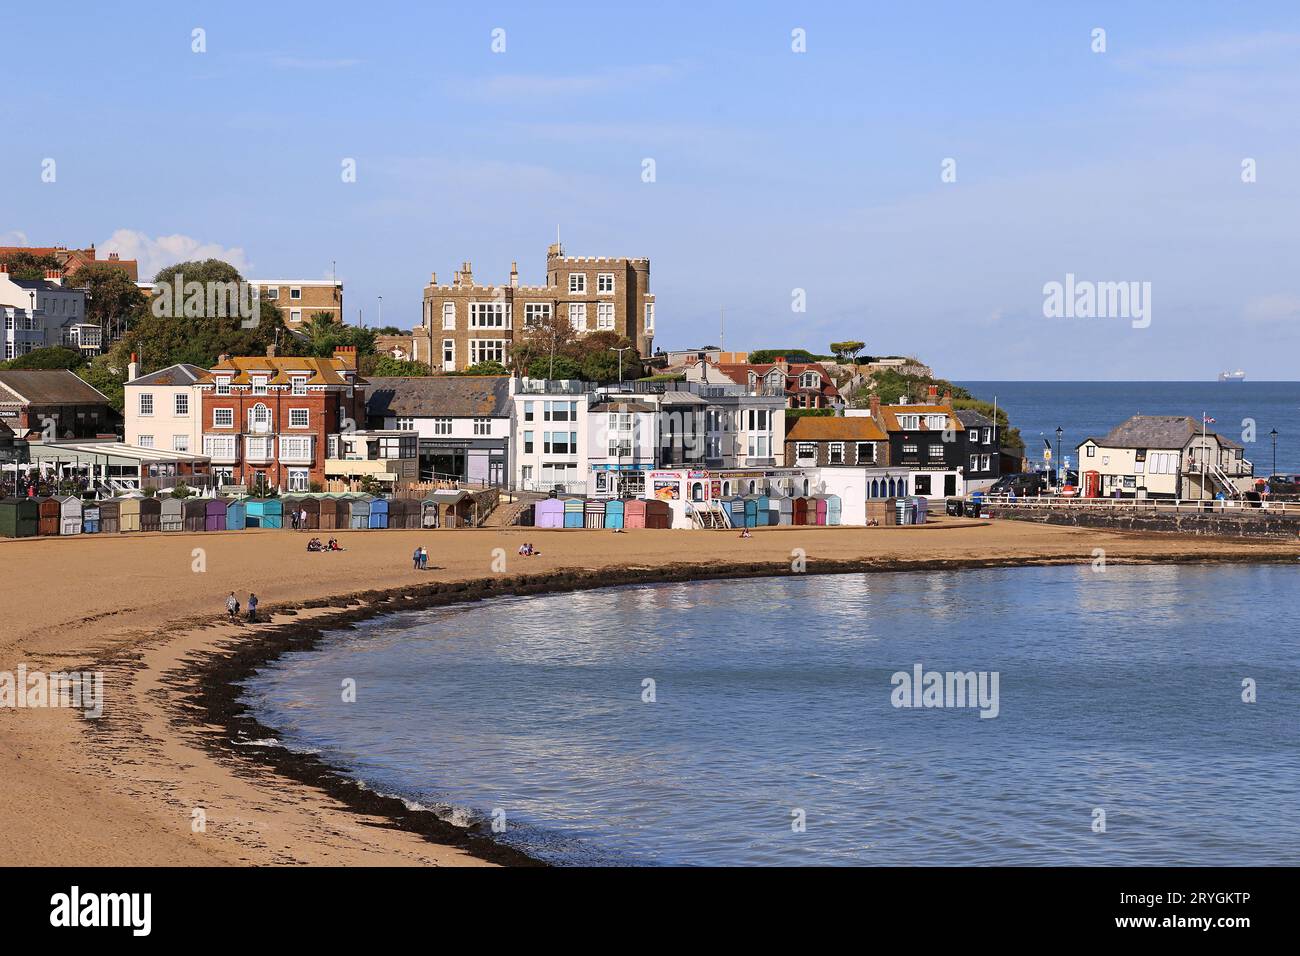 Beach and Harbour (seen from The Promenade), Broadstairs, Isle of Thanet, Kent, England, Great Britain, United Kingdom, UK, Europe Stock Photo